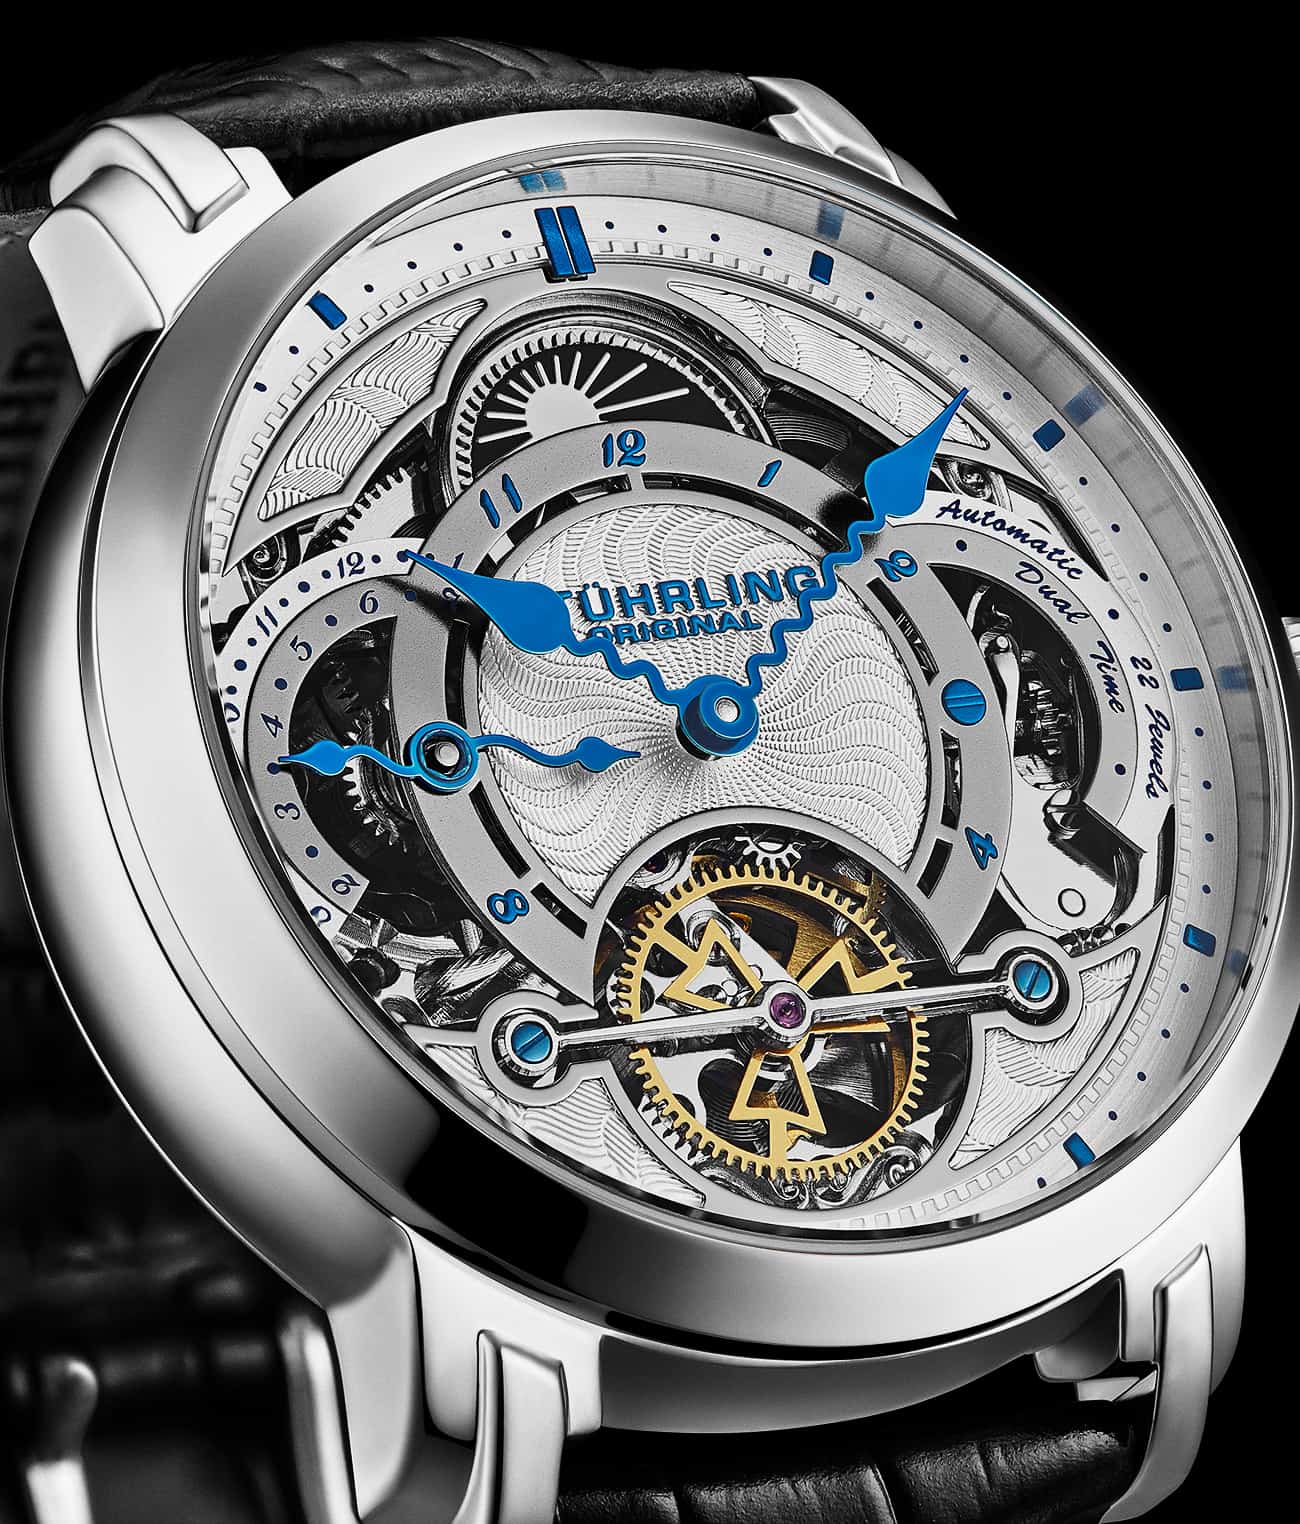 Celestial Timekeeper 1017 Dual Time Automatic 44mm Skeleton Watch